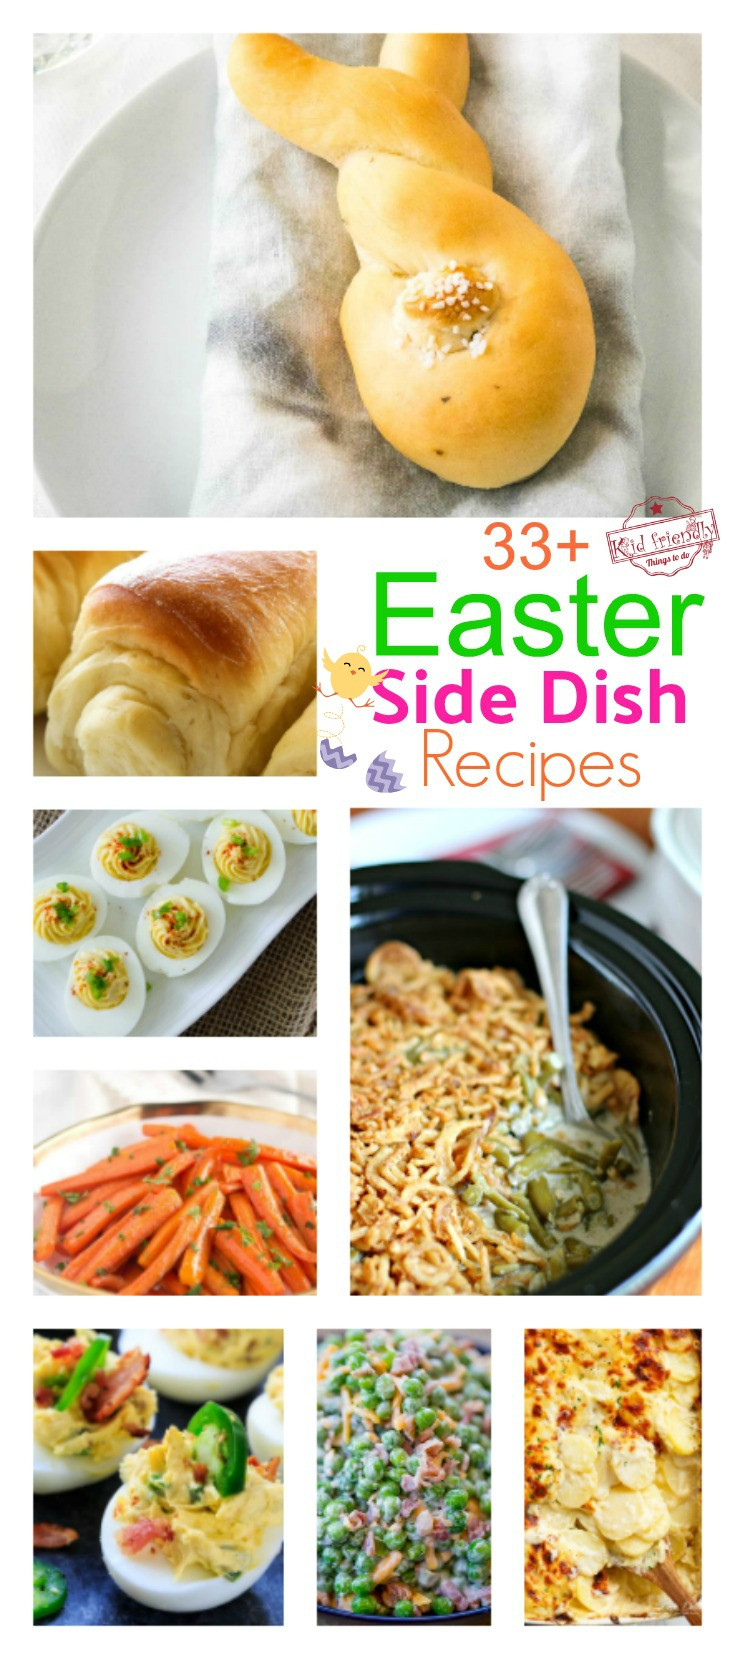 Side Dishes Easter
 Over 33 Easter Side Dish Recipes for Your Celebration Dinner